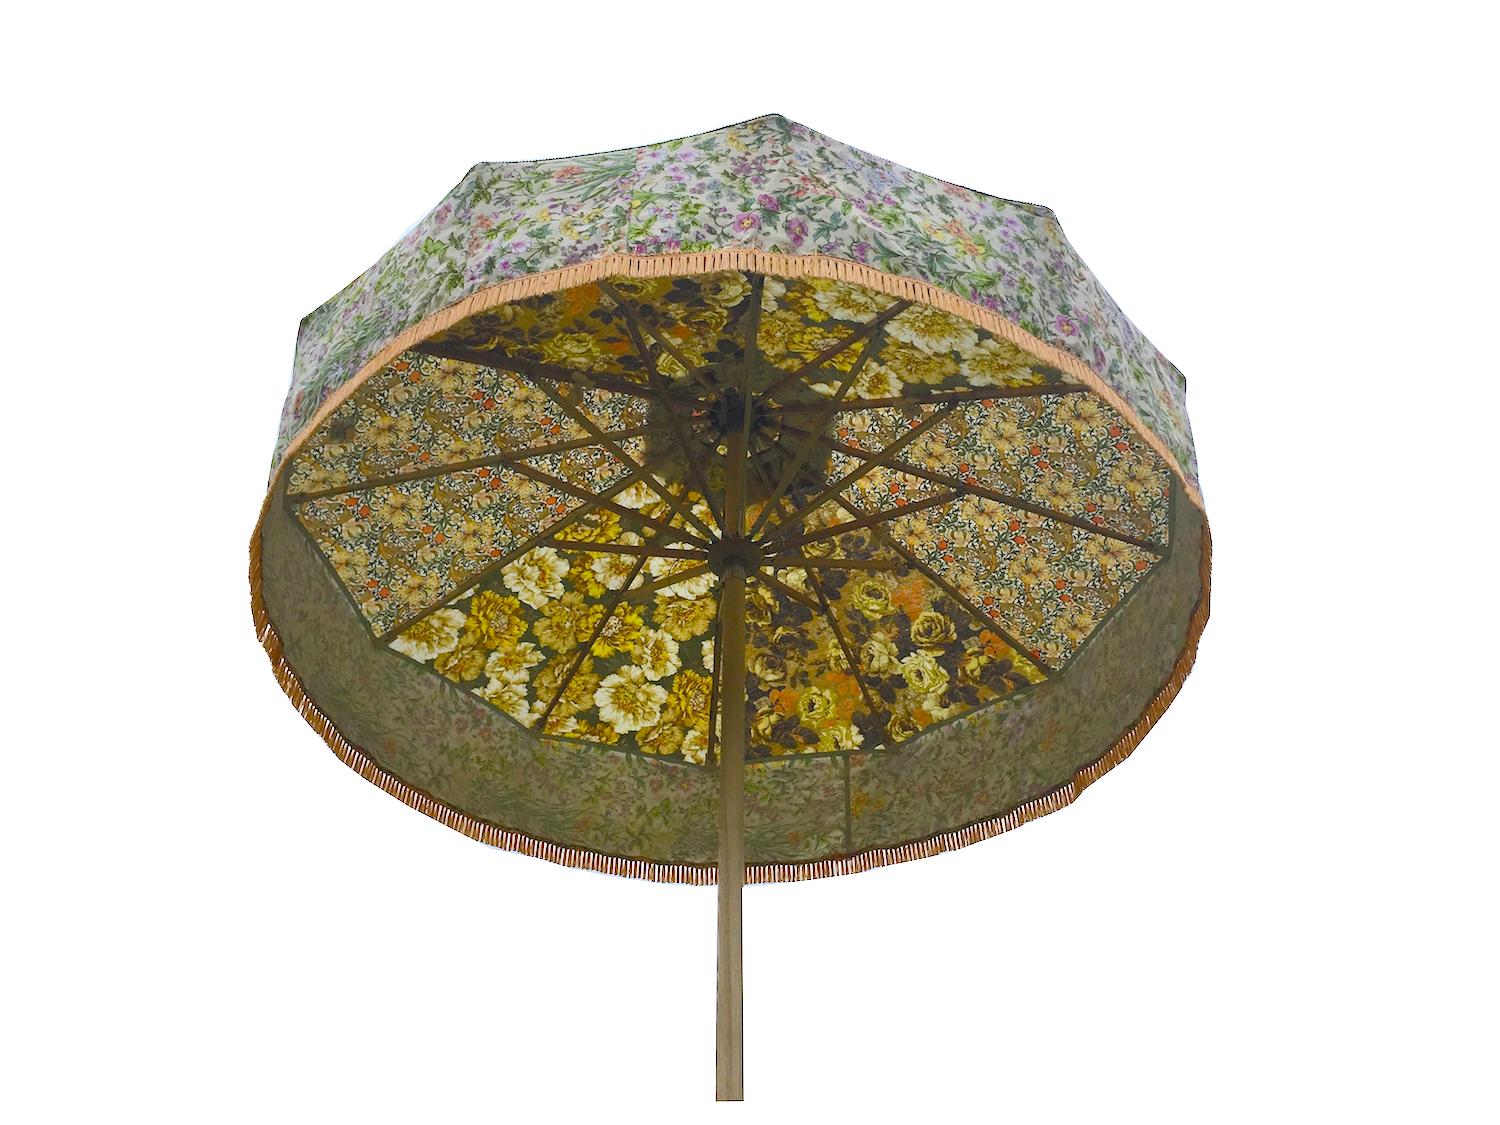 You are viewing one of Sunbeam Jackie's iconic sun umbrellas. 

This patio umbrella is made using a unique combination of vintage fabrics from legendary British textile houses including Designers Guild and Sanderson. See the Sunbeam Jackie